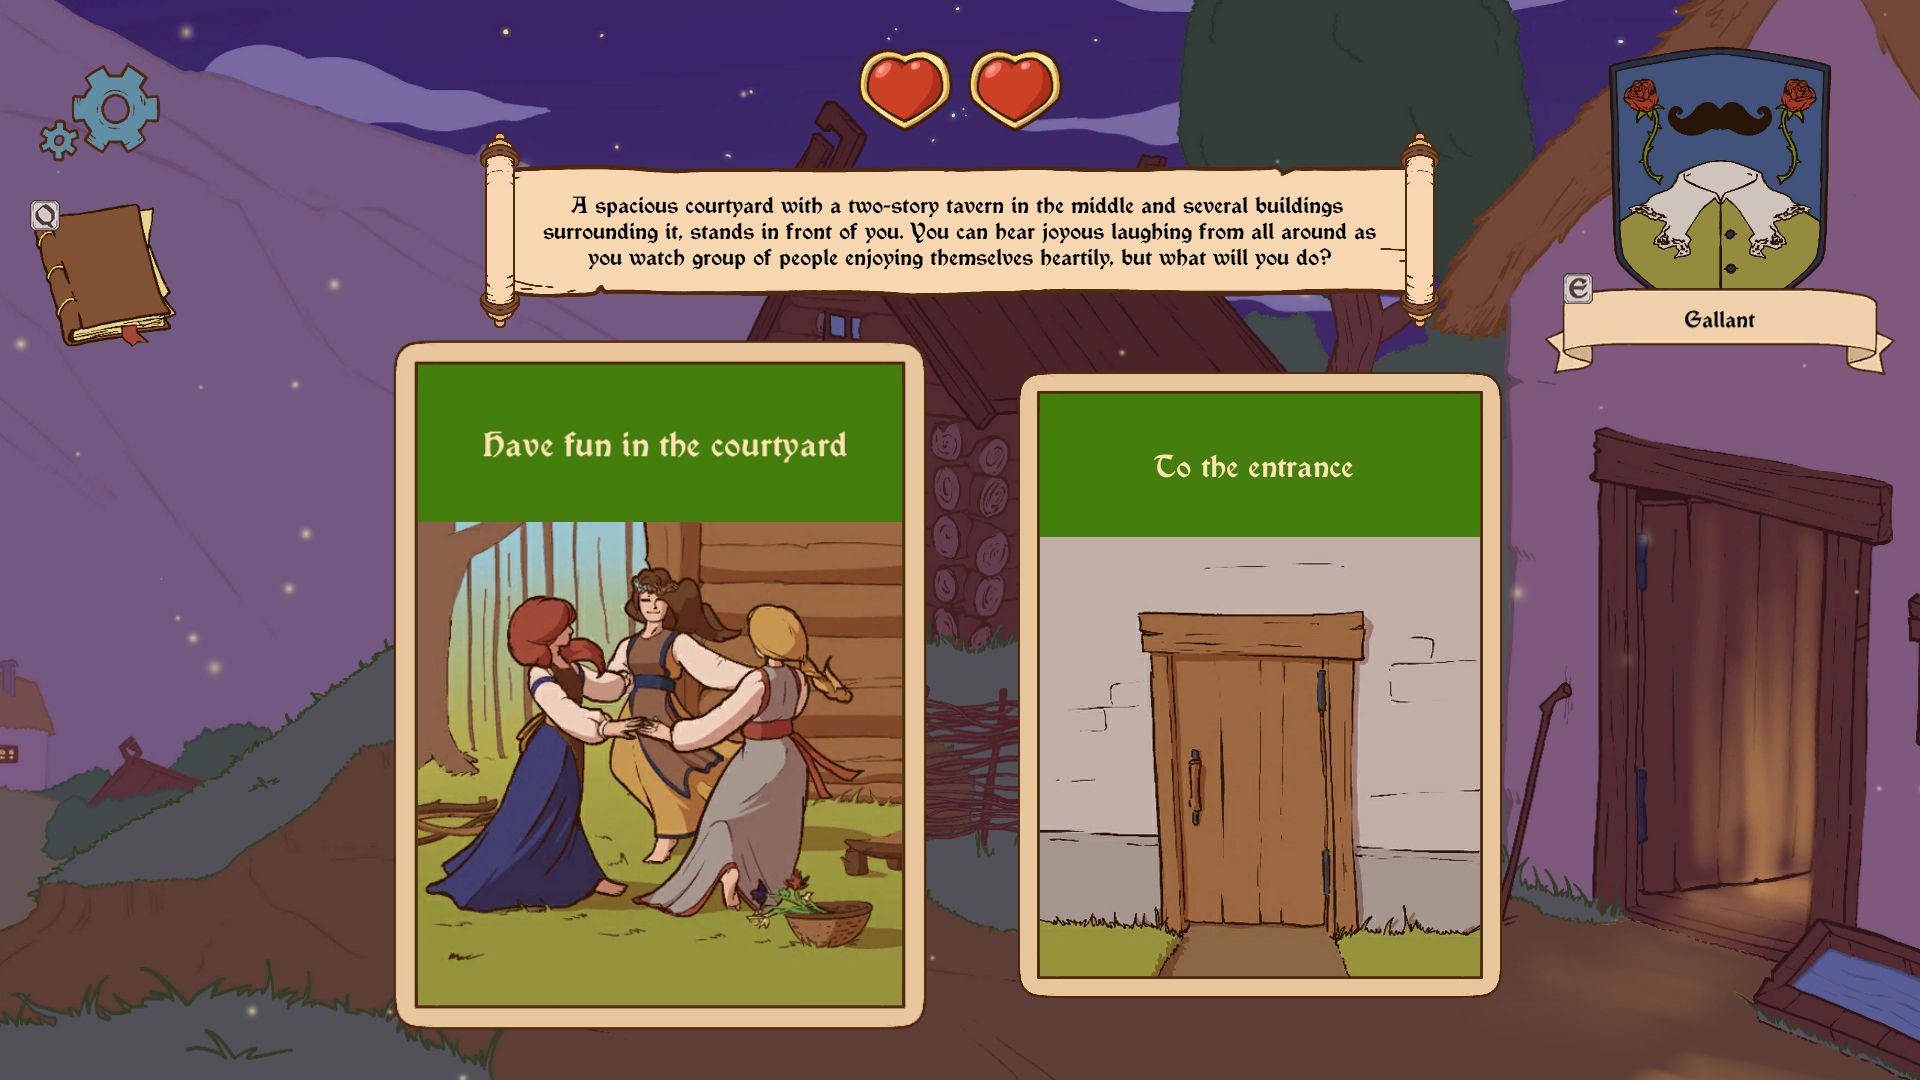 Download Choice of Life: Middle Ages 2 für Android kostenlos.